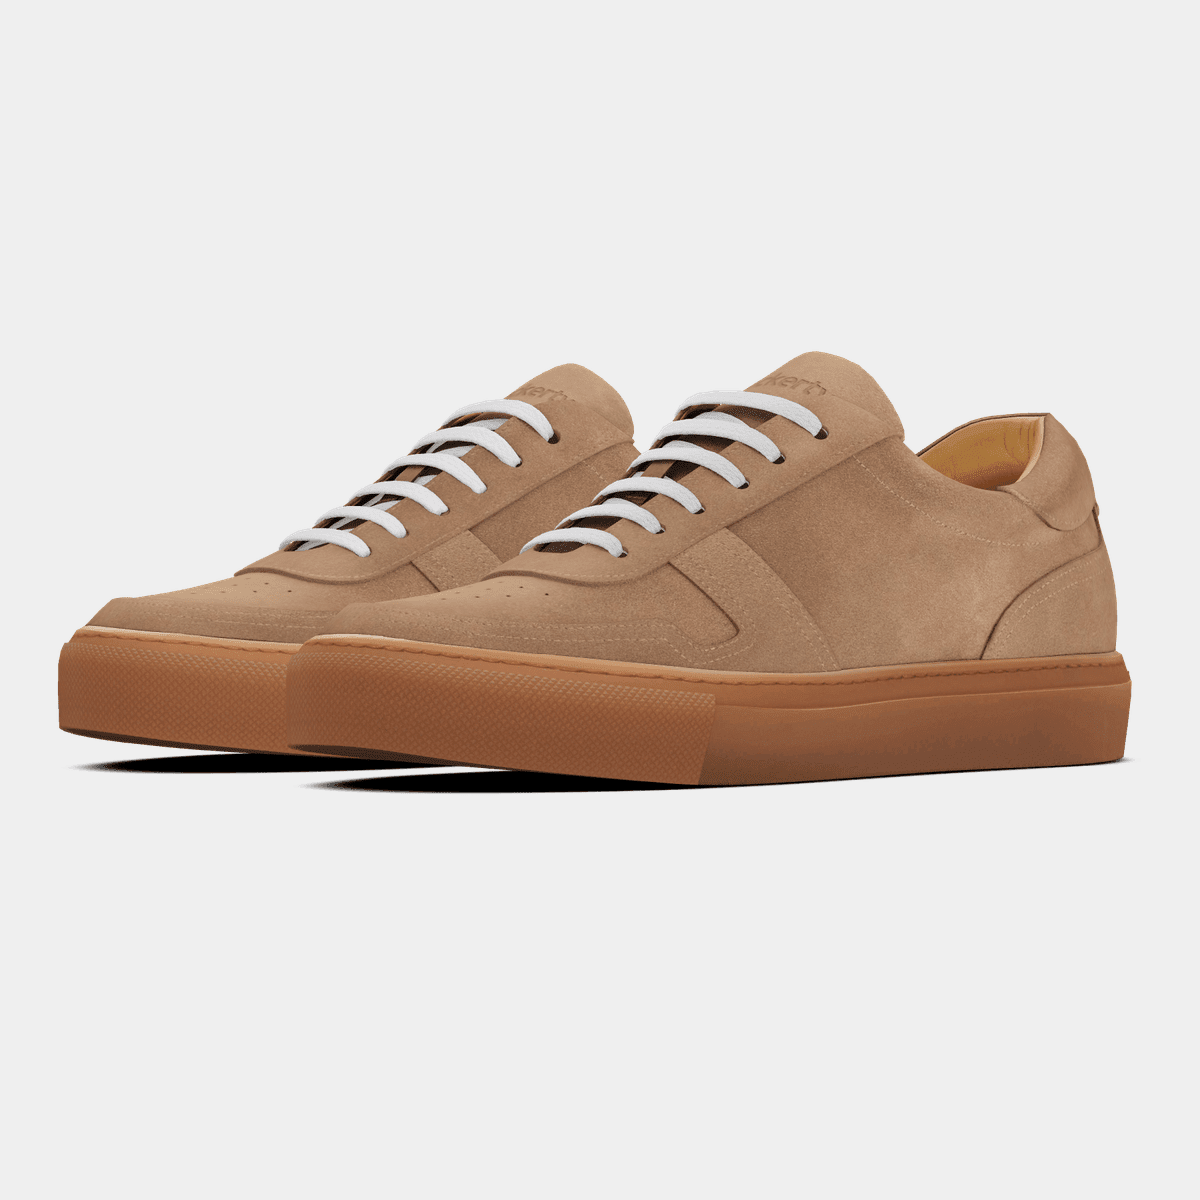 Beige suede low-top Sneakers with caramel sole